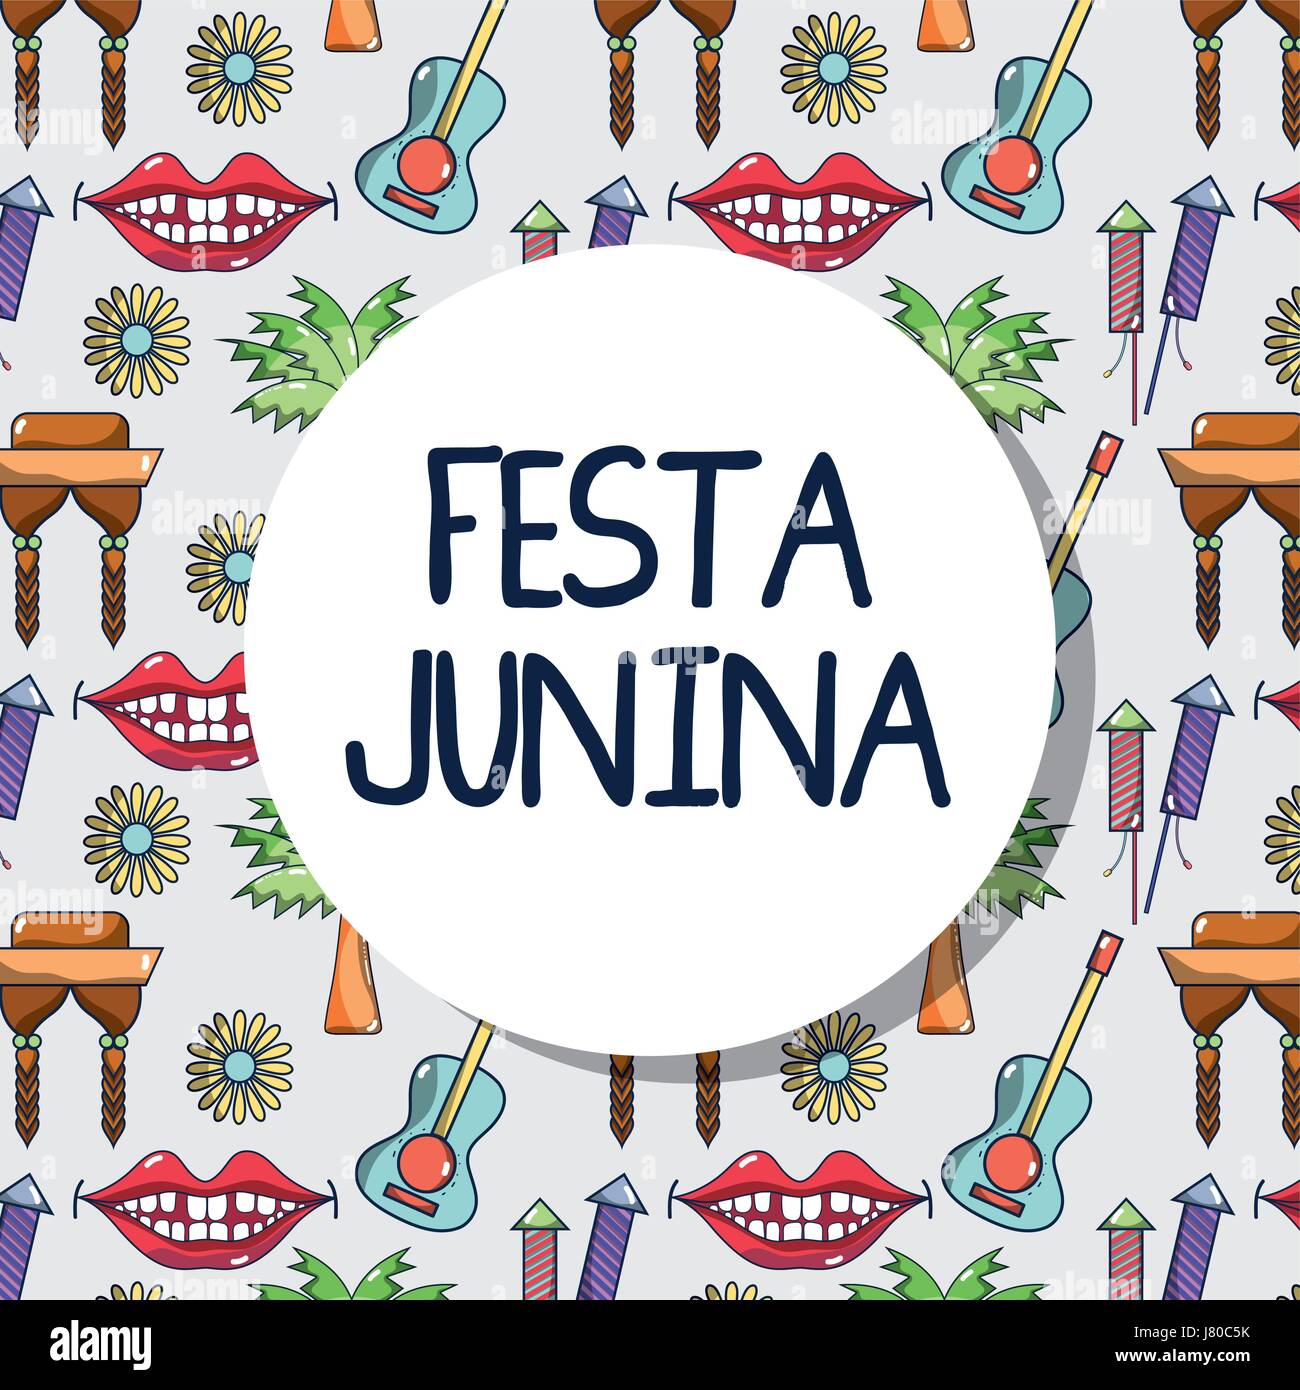 colorful pattern with elements of festa junina celebration Stock Vector